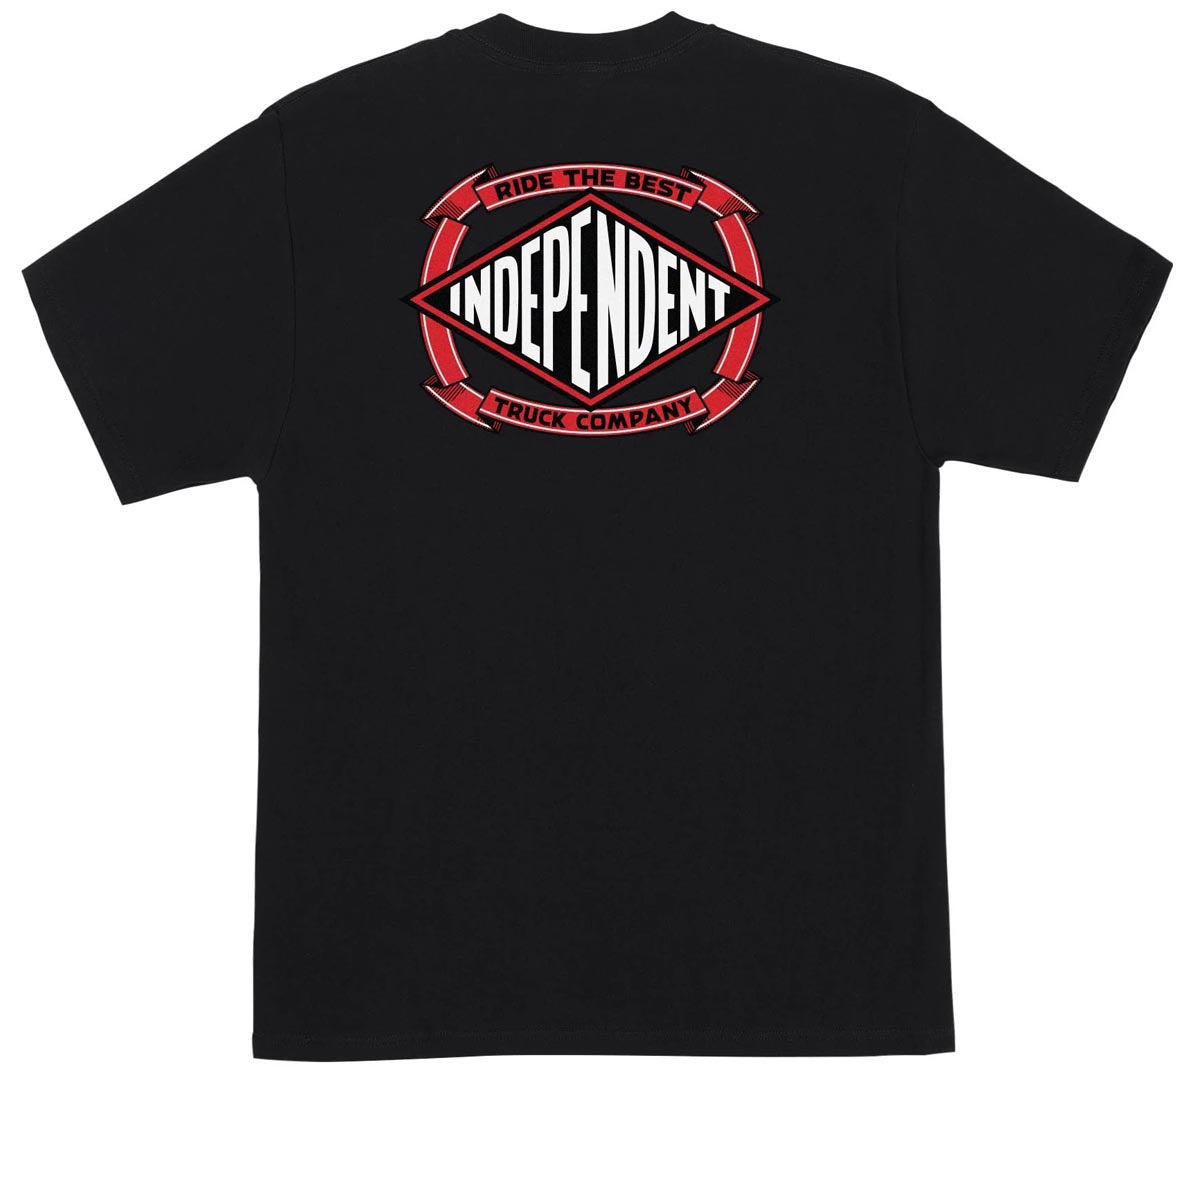 Independent Summit Scroll T-Shirt - Black image 1